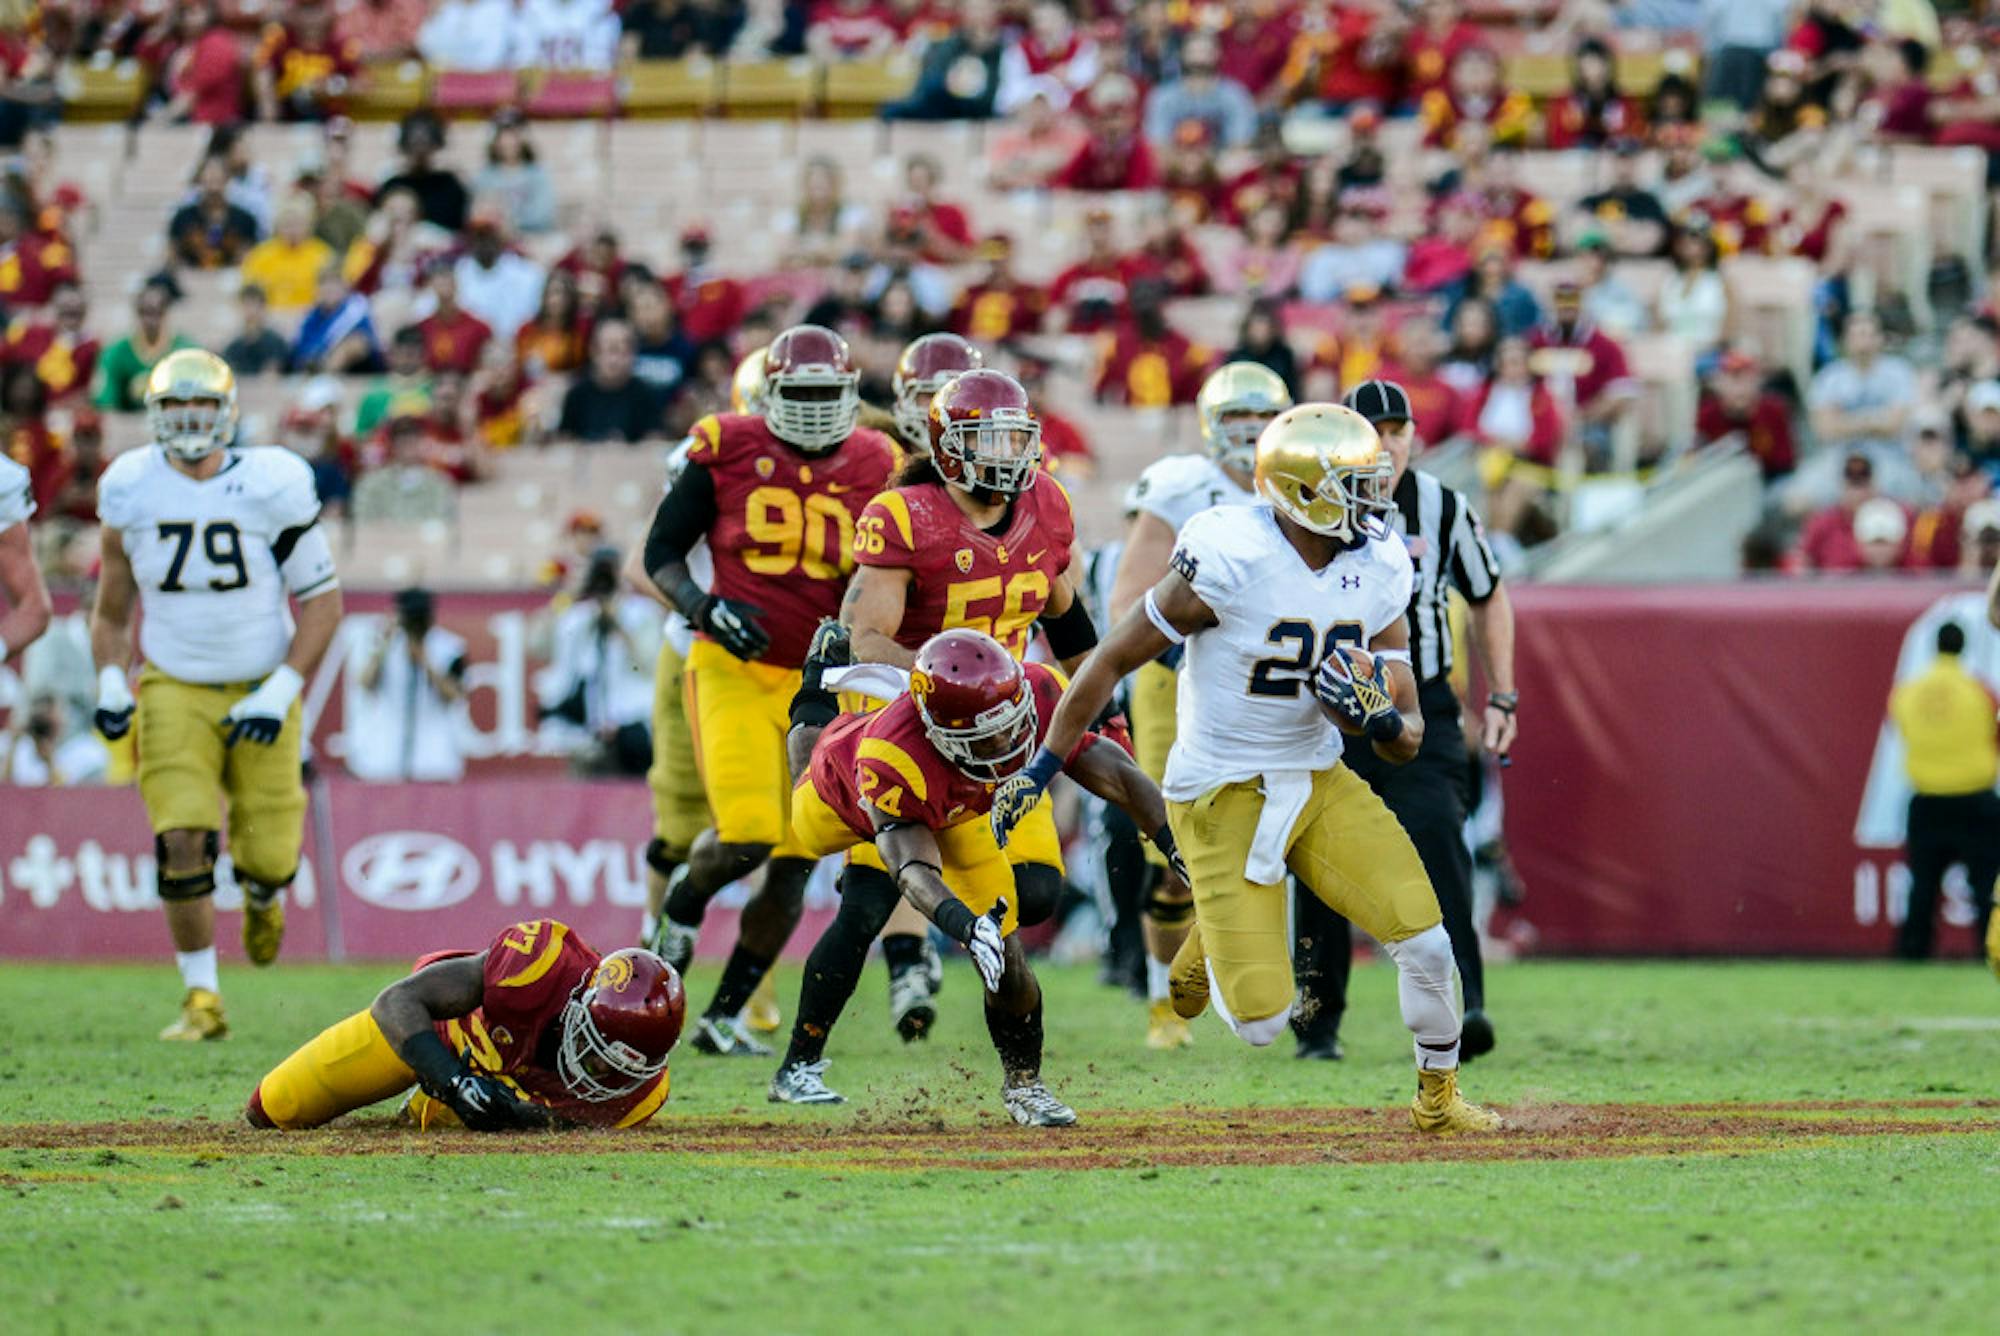 Irish junior running back C.J. Prosise attempts to outrun USC defenders.